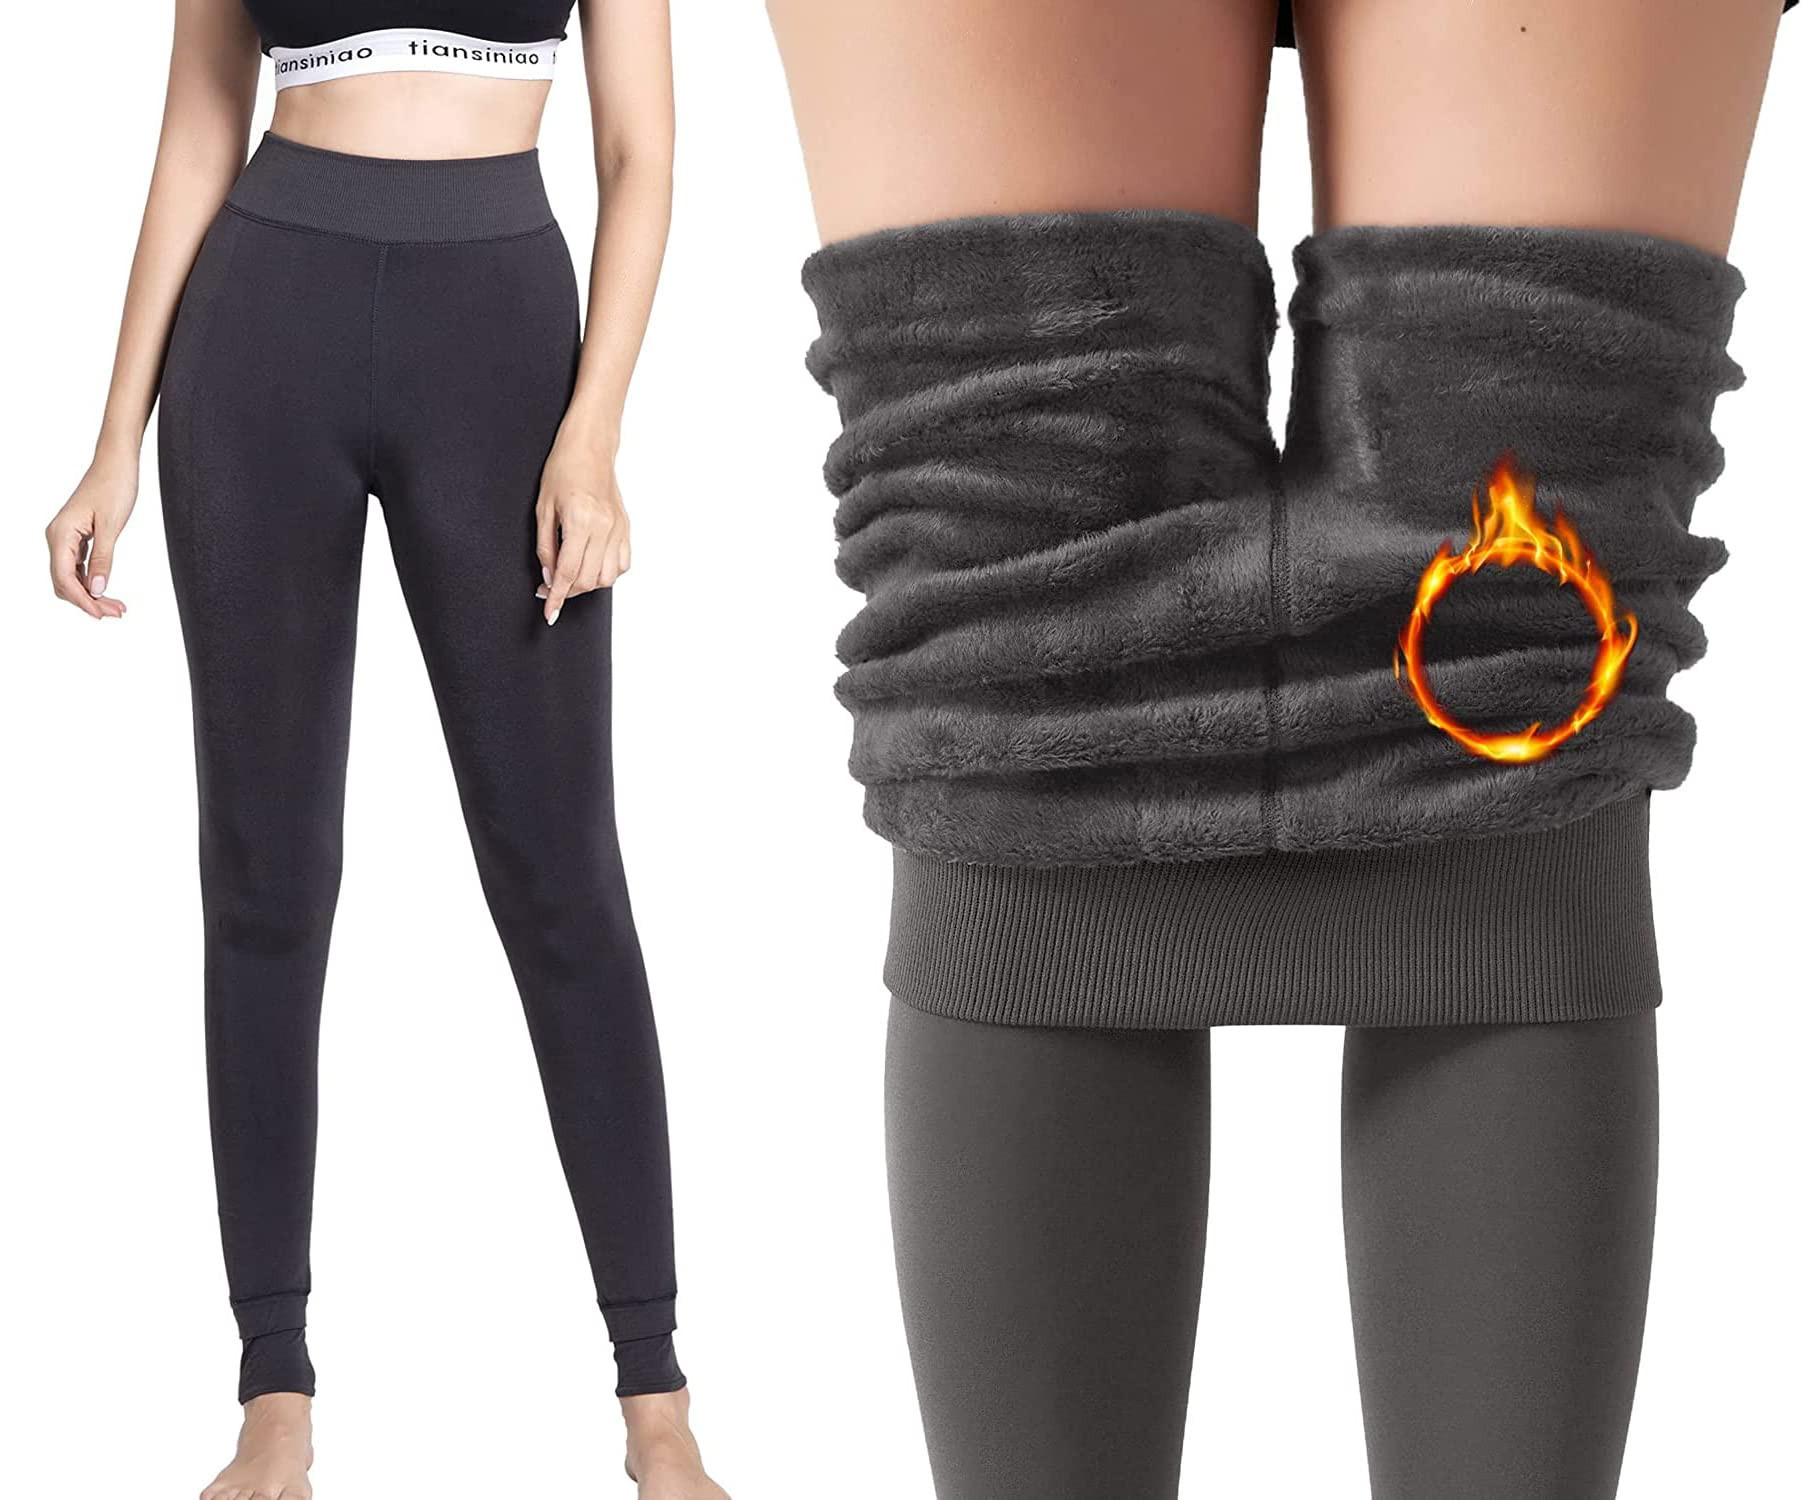 https://www.zebrs.com/uploads/zebrs/products/hsr-winter-warm-leggings-women-elastic-stretchable-thermal-legging-pants-fleece-lined-thick-tights-grey-waist-size-26-to-32-inch-stretchablesize-32-181788097459461_l.jpg